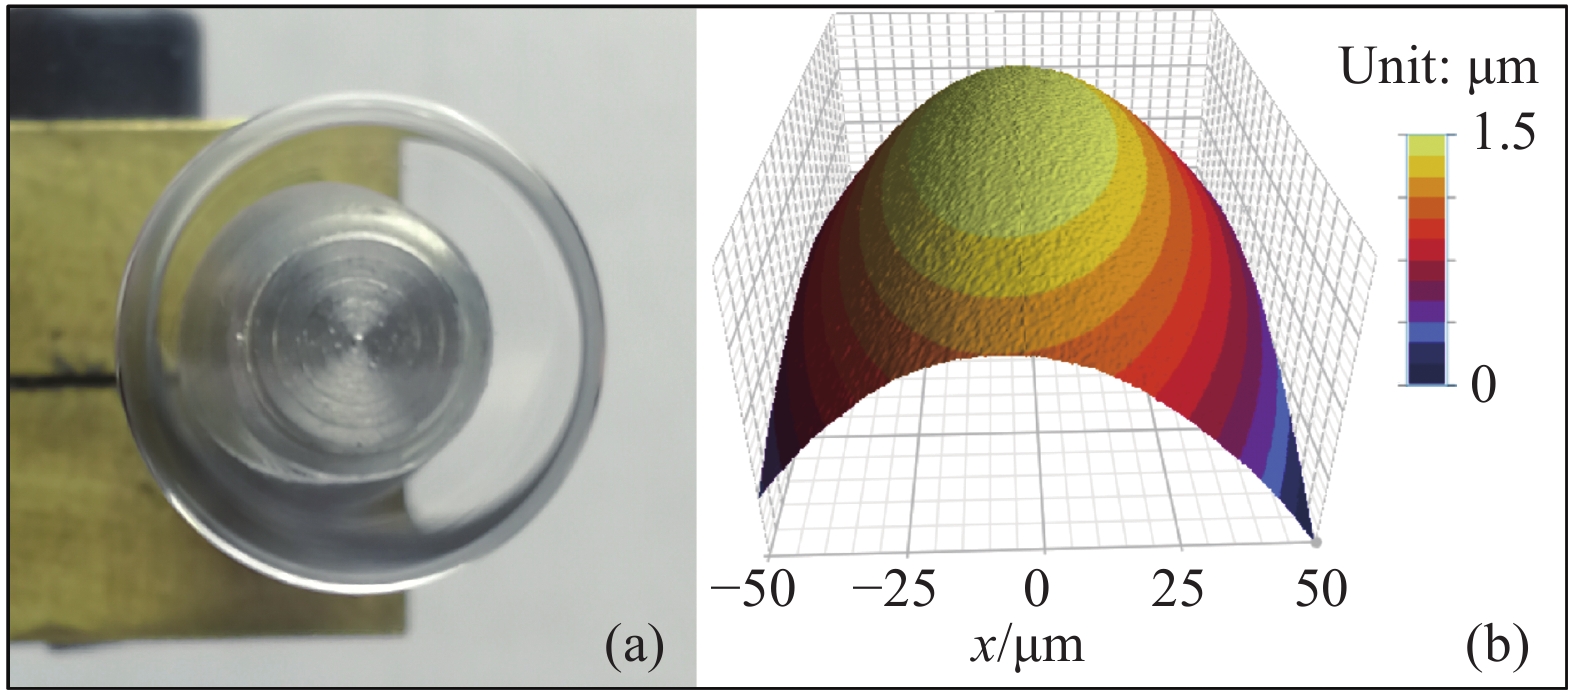 (a) Picture of MgF2 crystalline resonator; (b) Characterization results of cavity sidewall profile